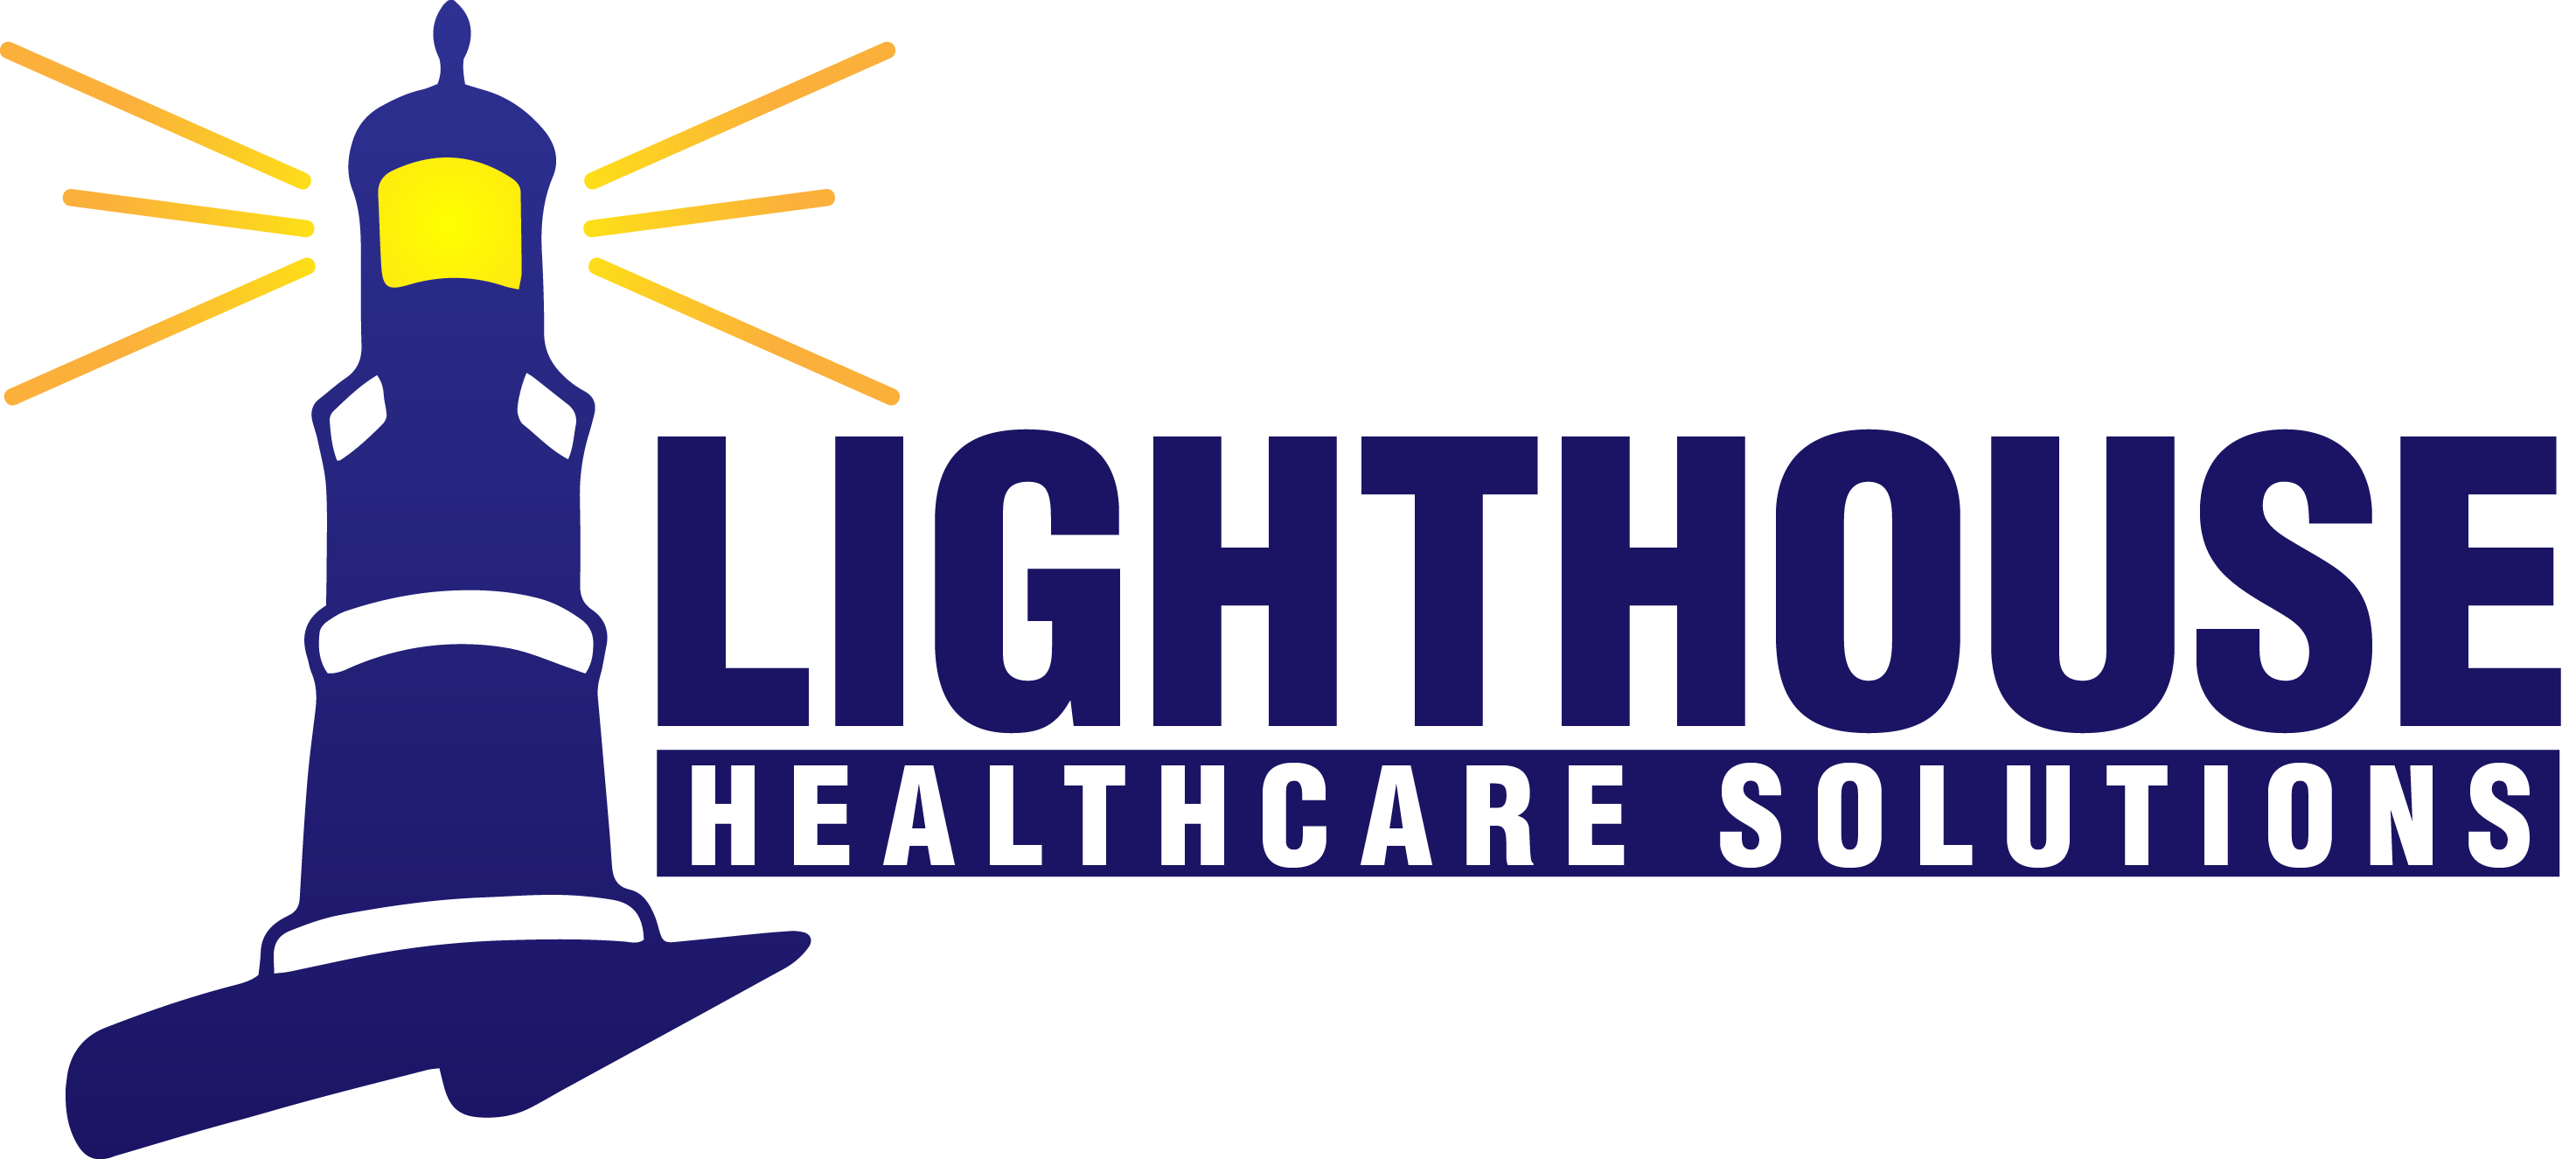 Working in partnership Lighthouse Healthcare Solutions.